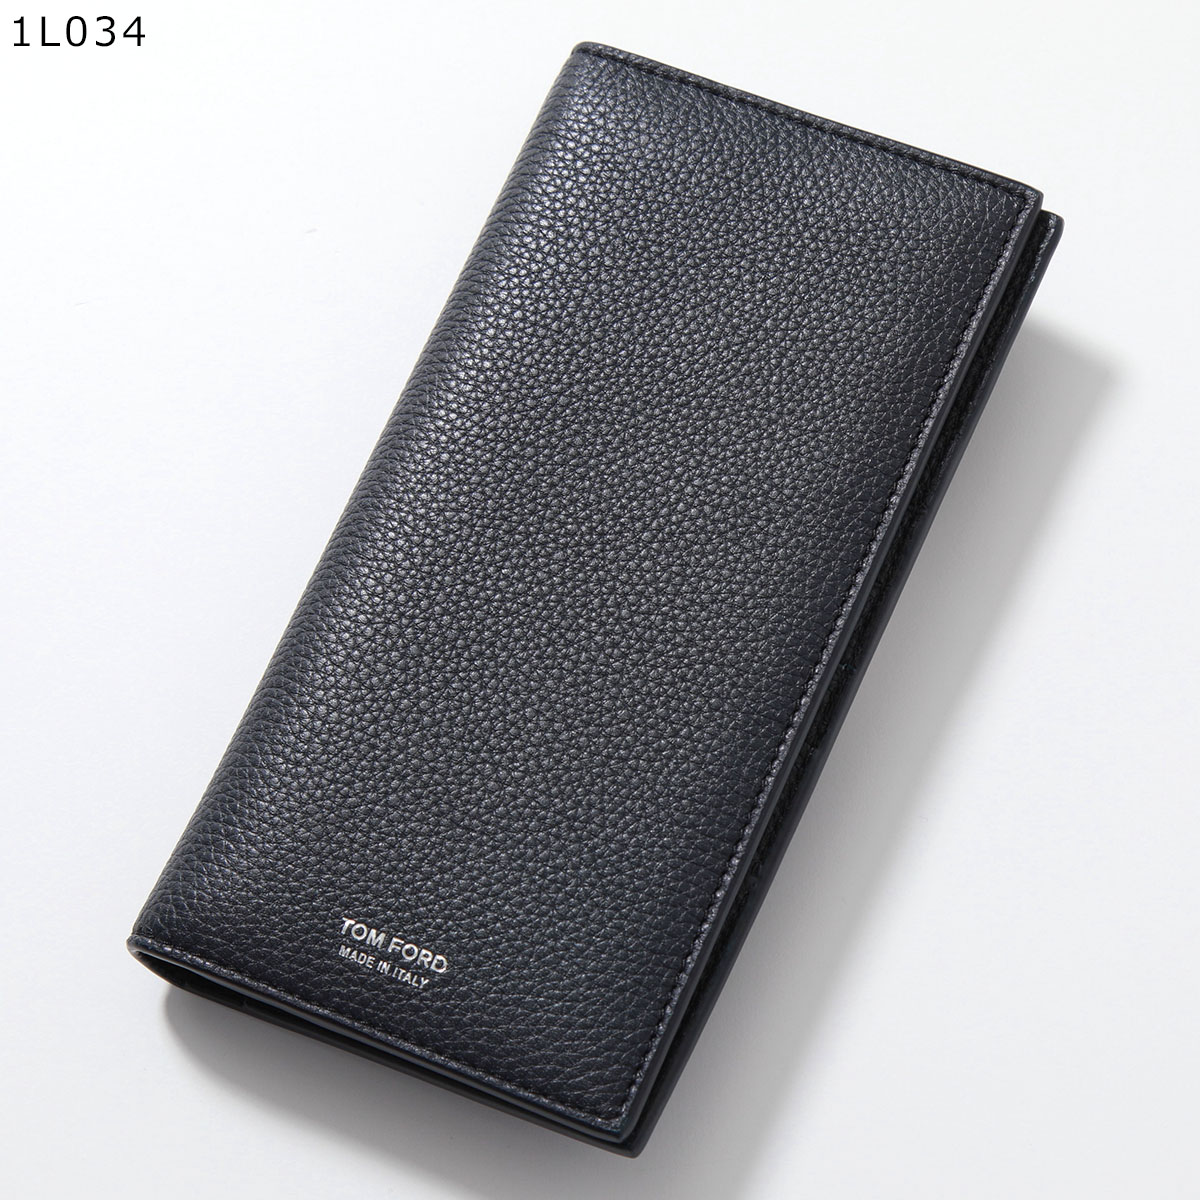 TOM FORD トムフォード 二つ折り長財布 Y0251T LCL158 Y0251 LCL158S メンズ レザー ロゴ 小銭入れあり カラー2色｜s-musee｜03